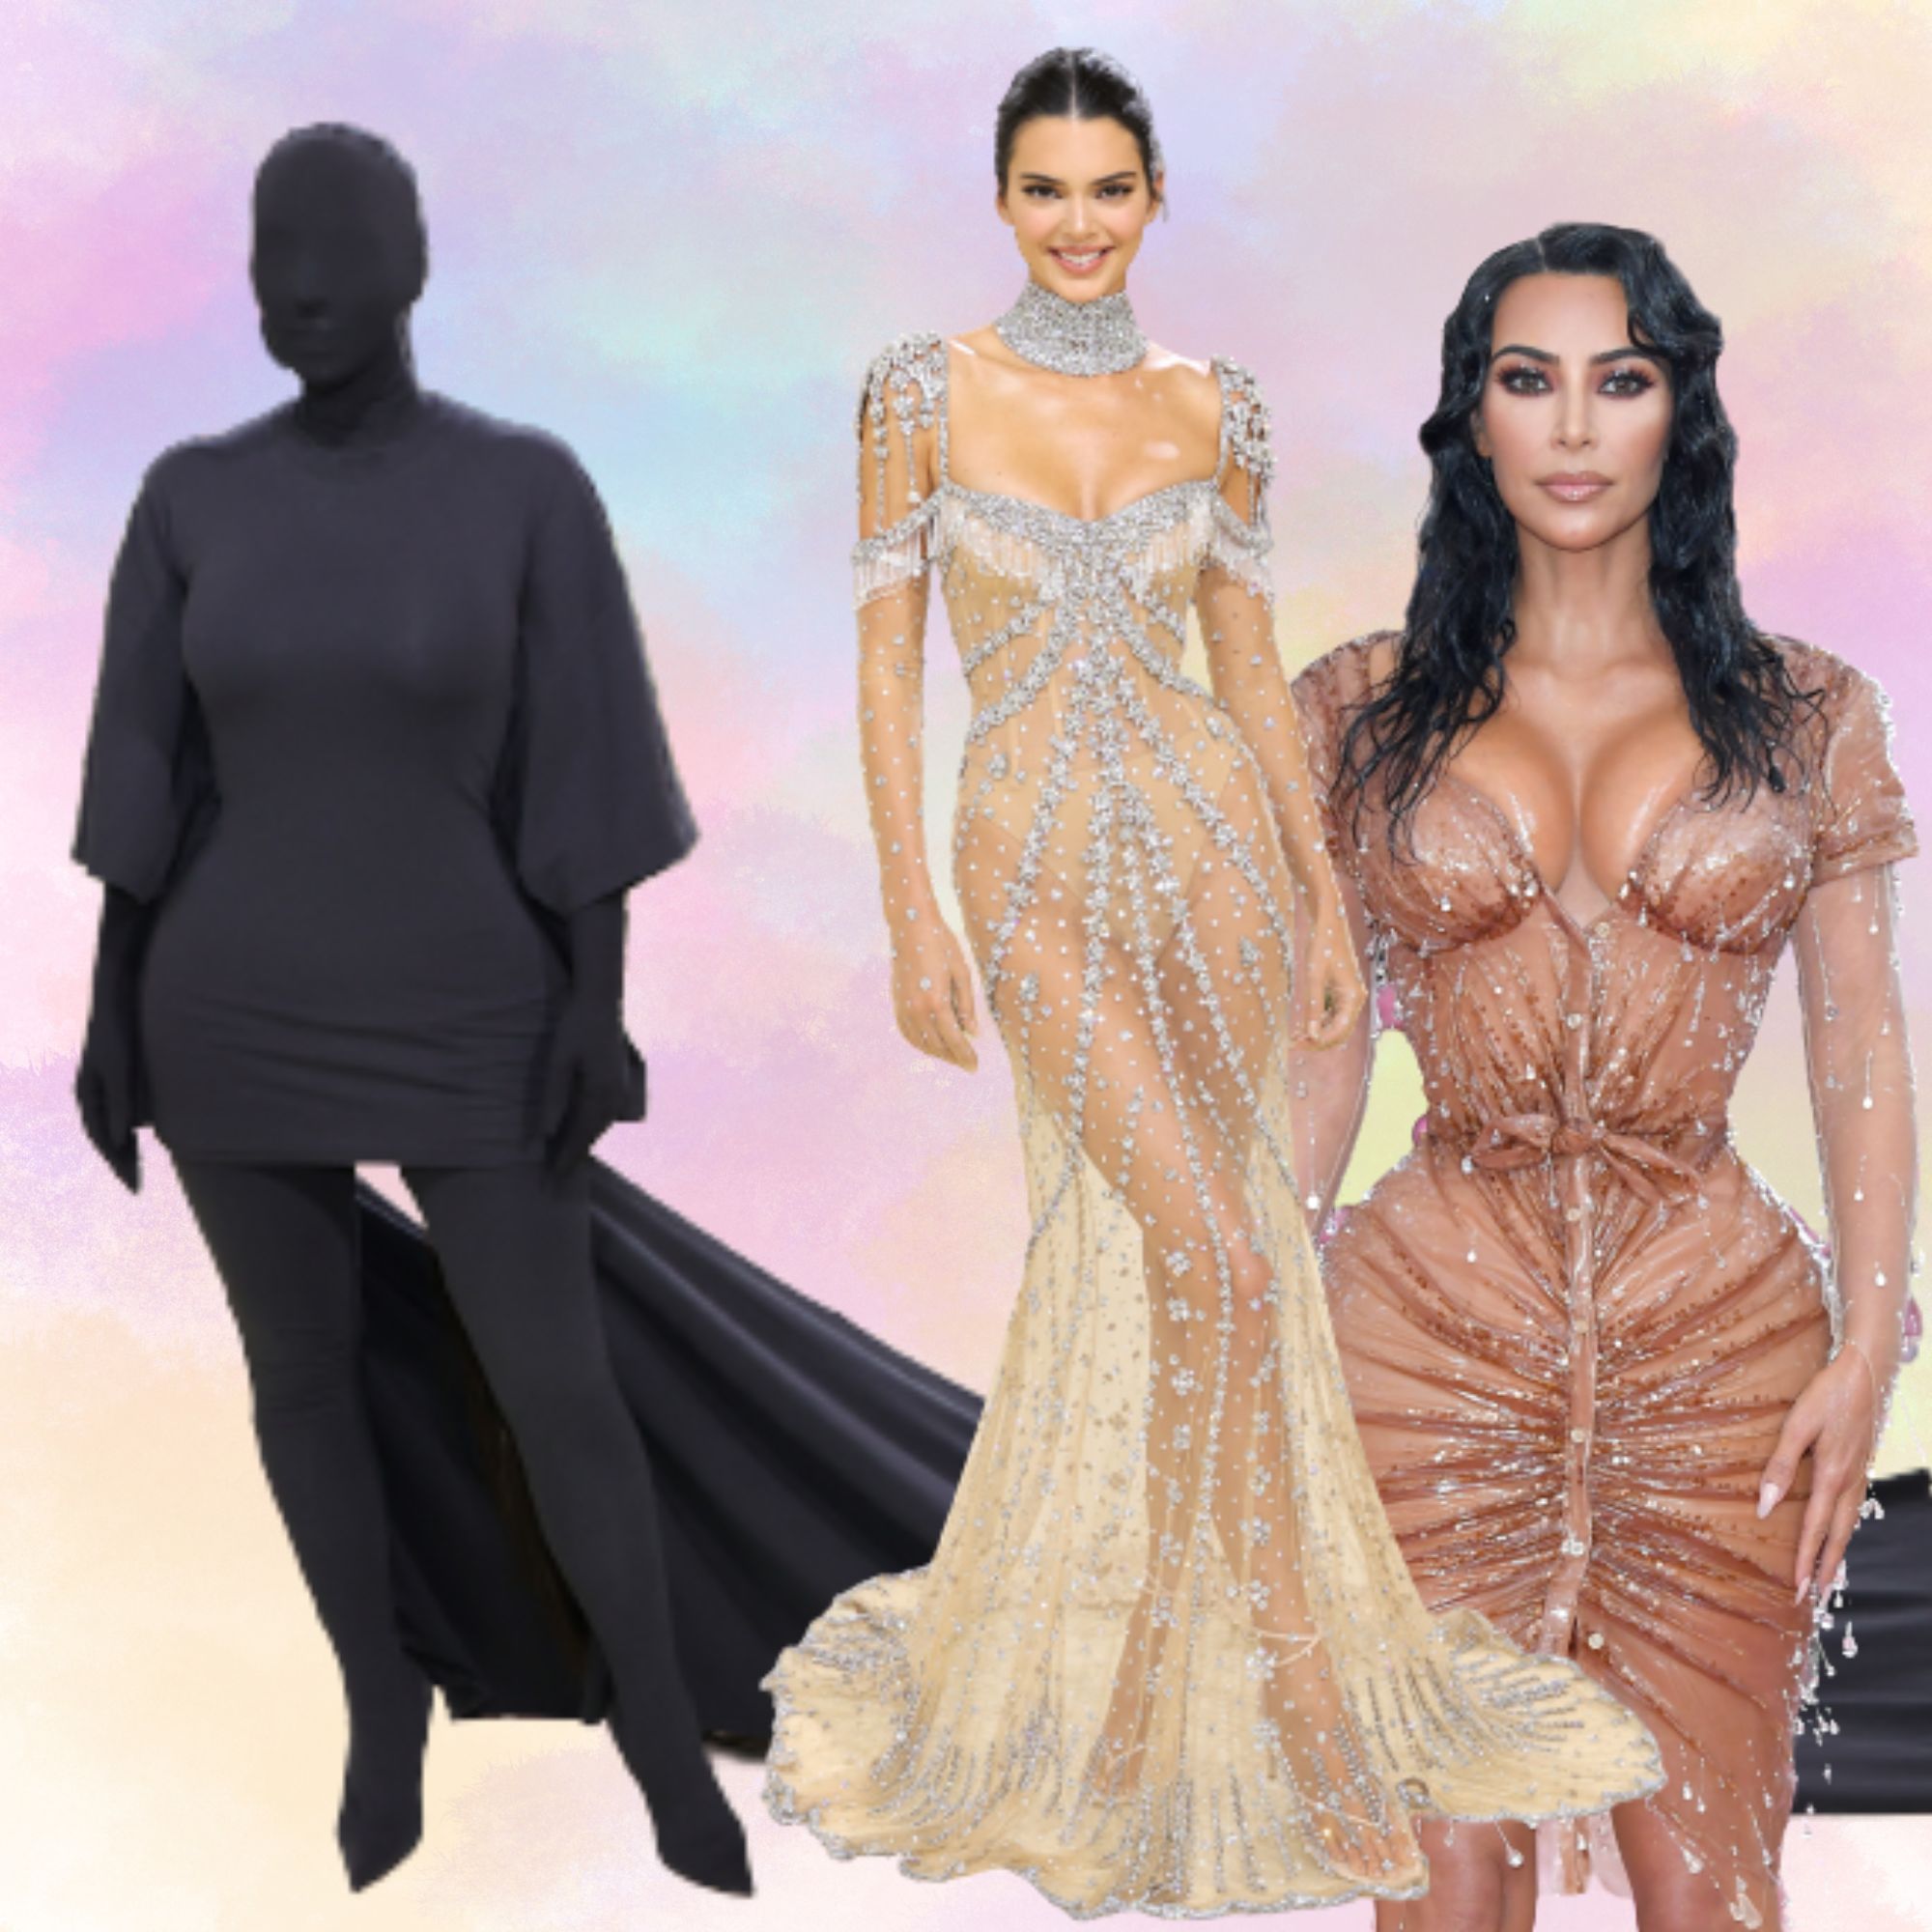 Did Kanye West Attend Met Gala With Kim Kardashian? Here's the Truth